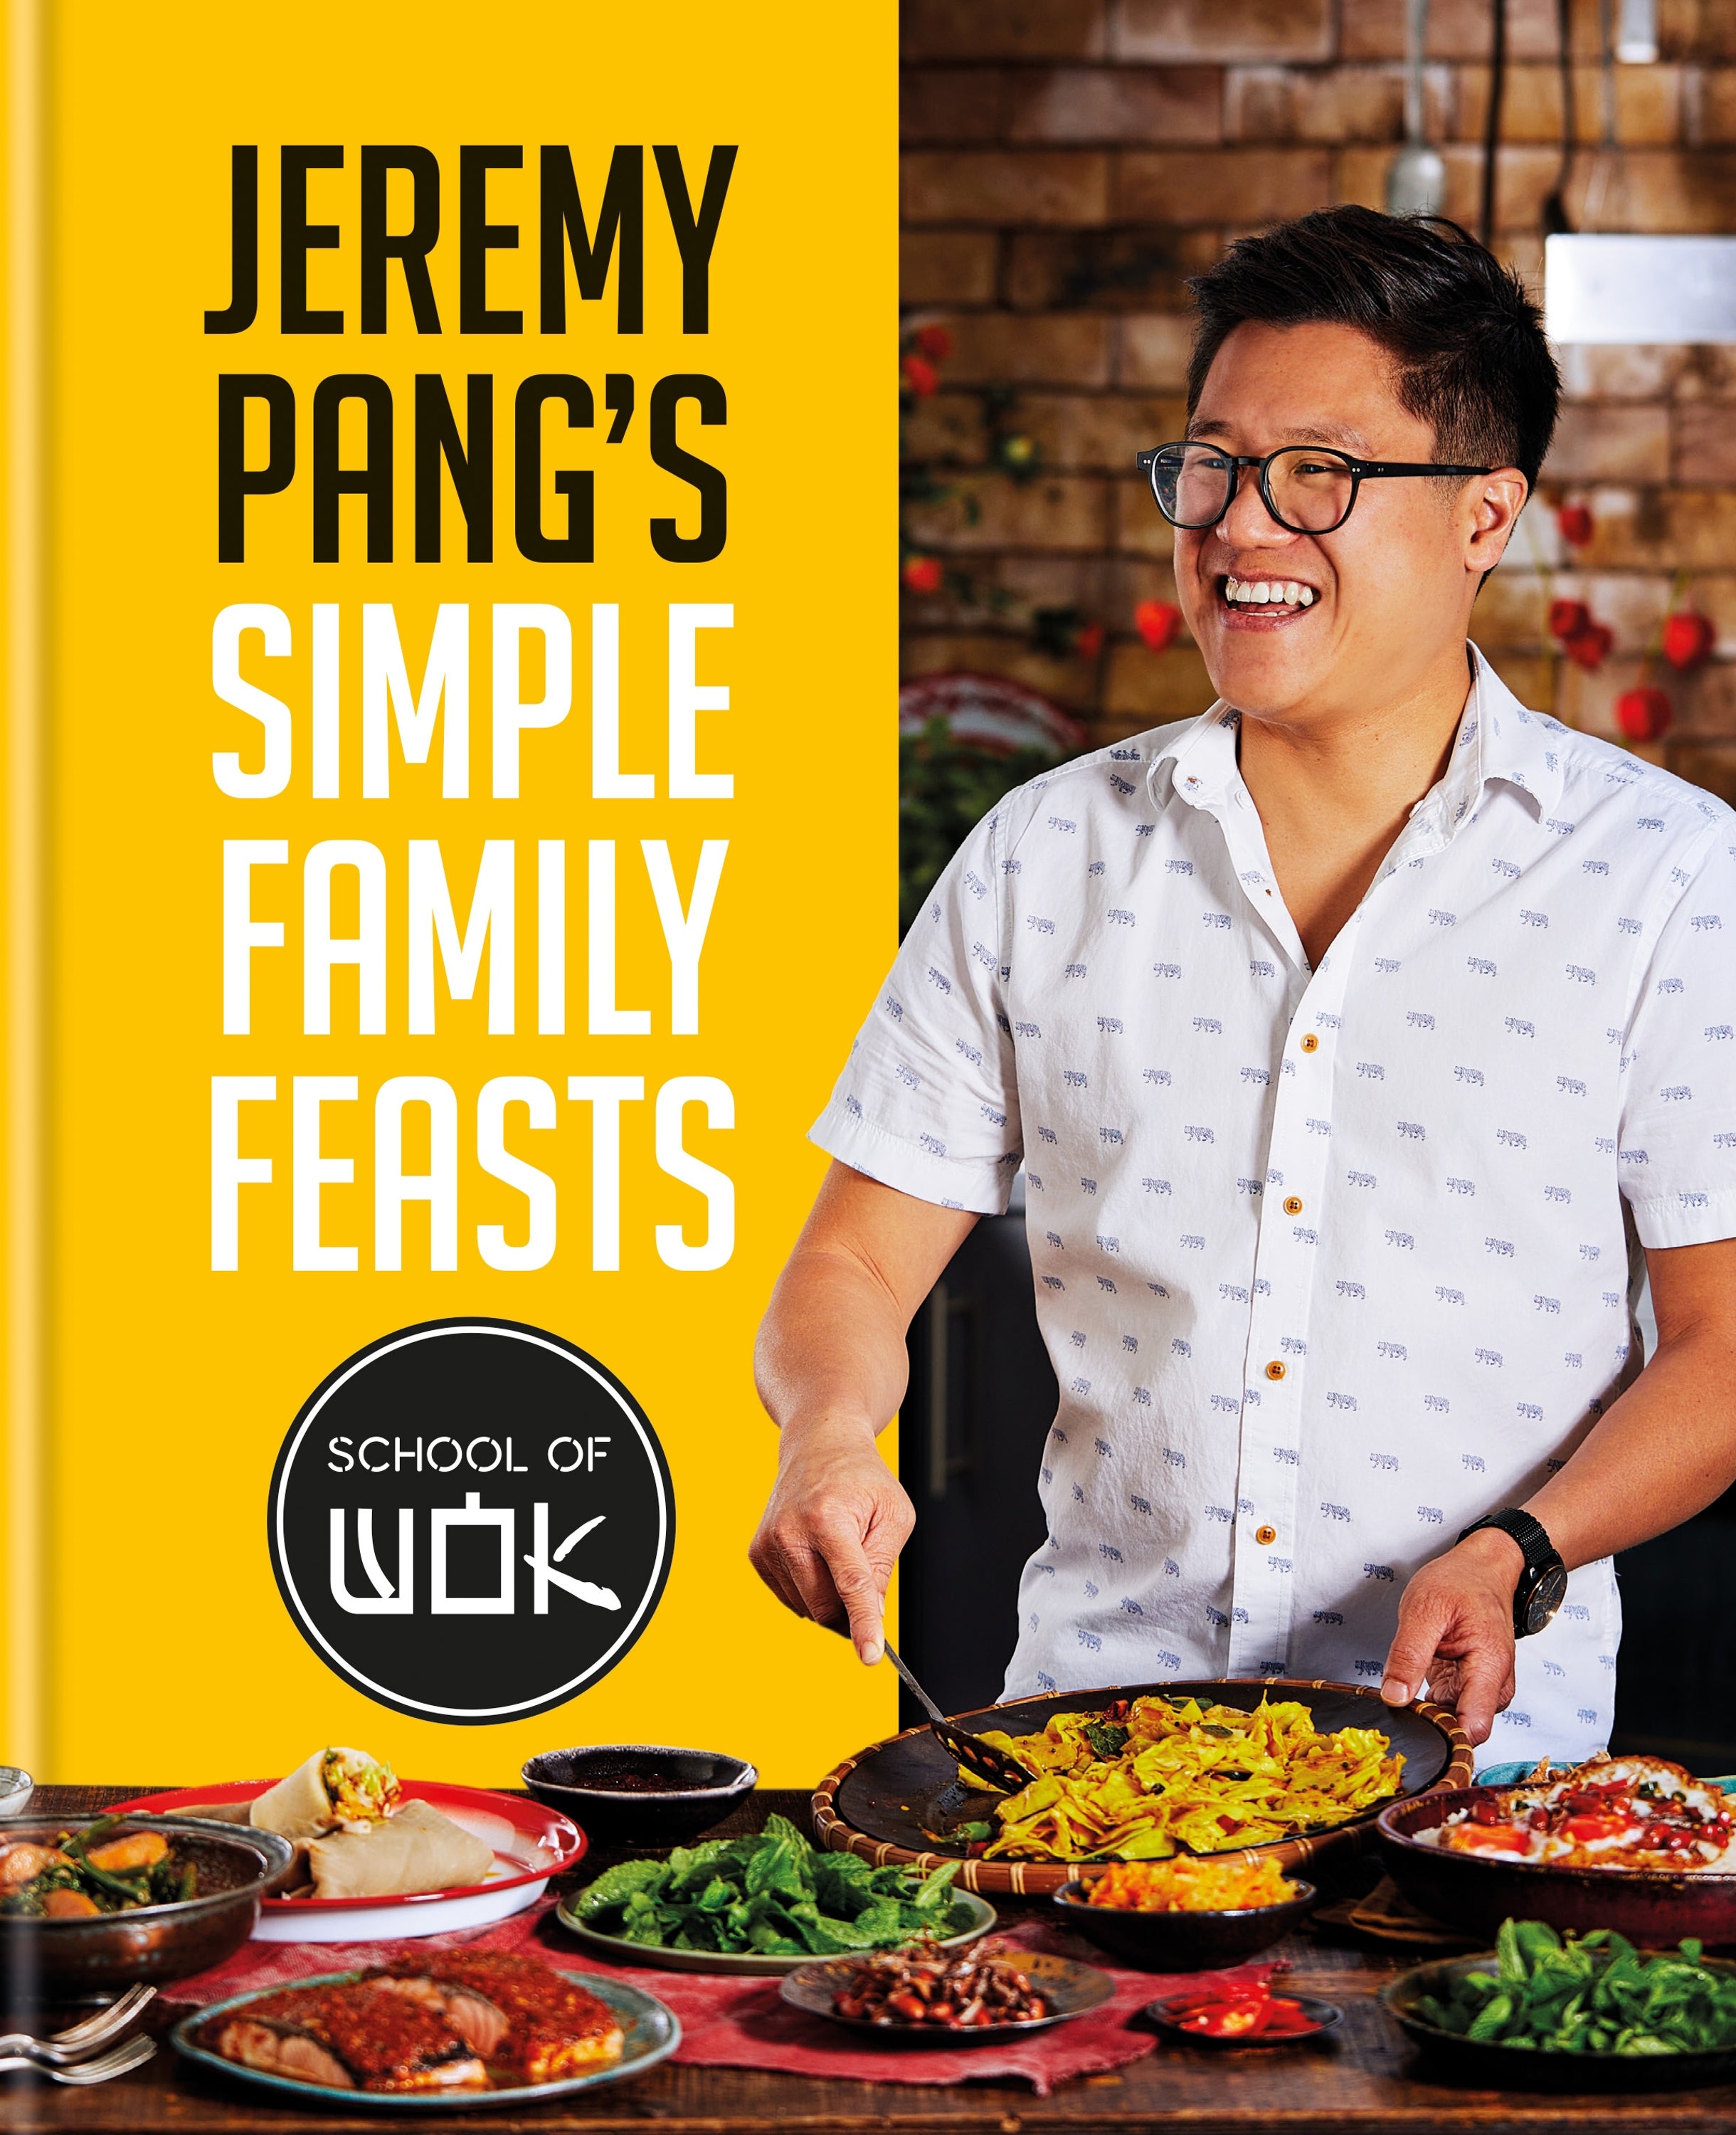 Pang’s new book is all about demystifying Southeast Asian cooking